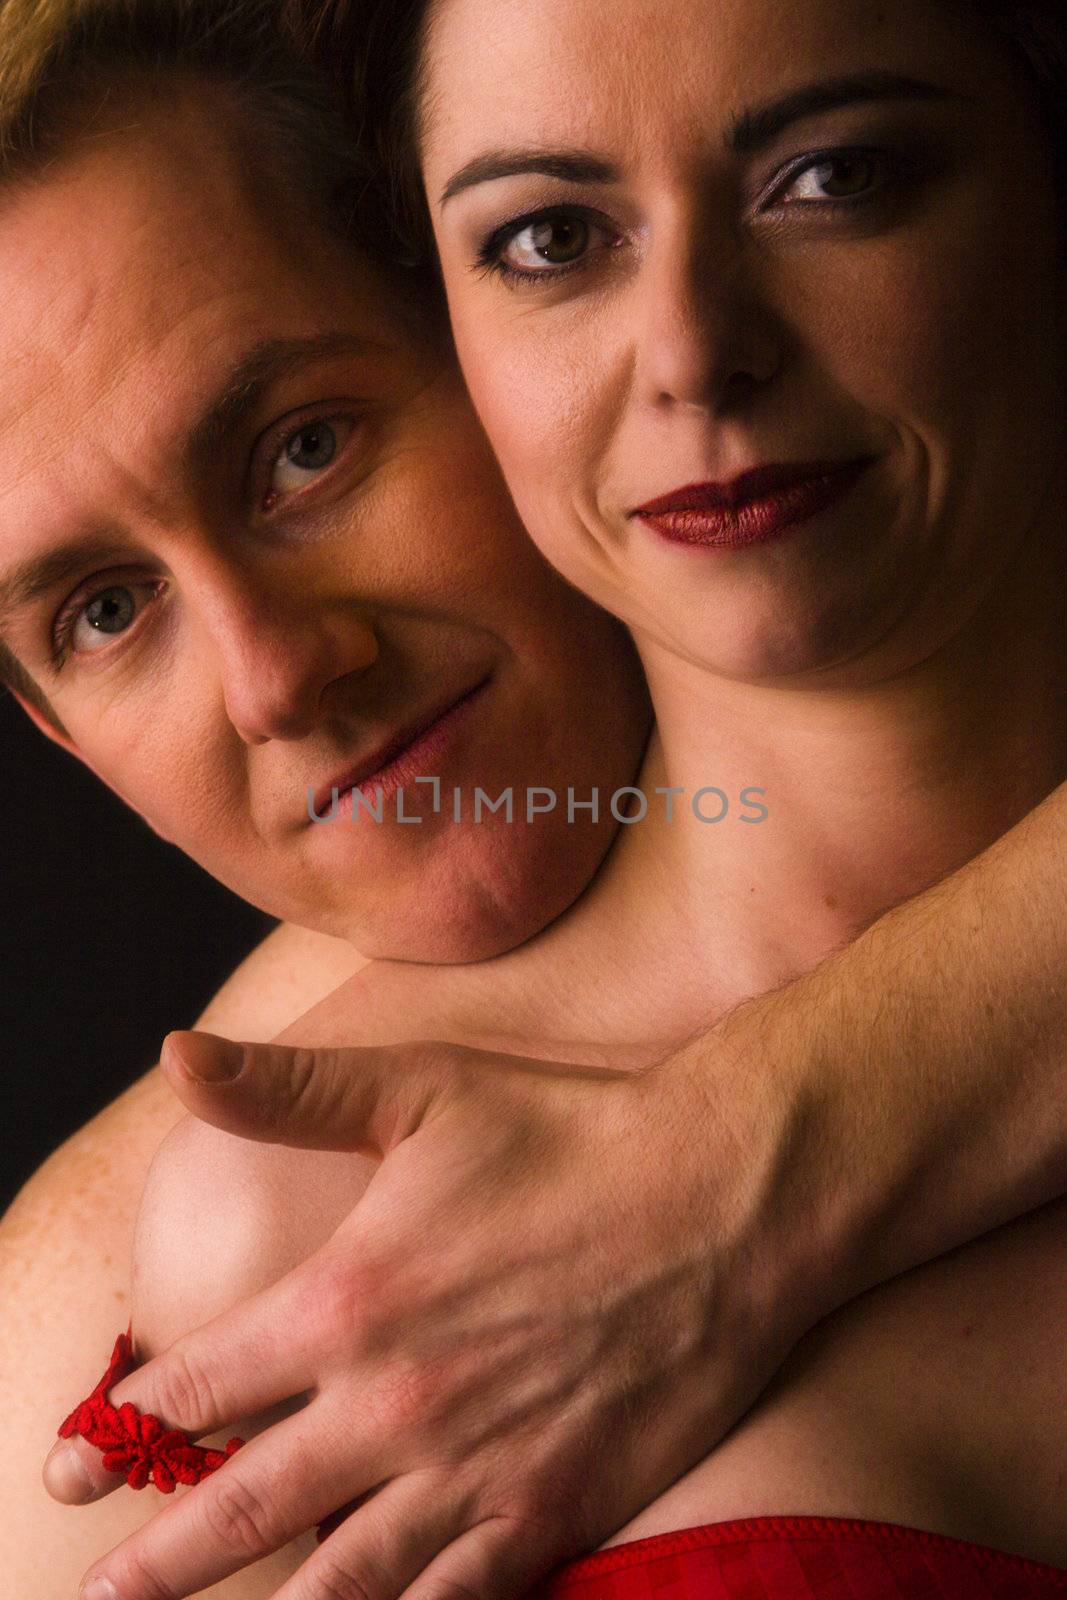 Man undressing woman by DNFStyle